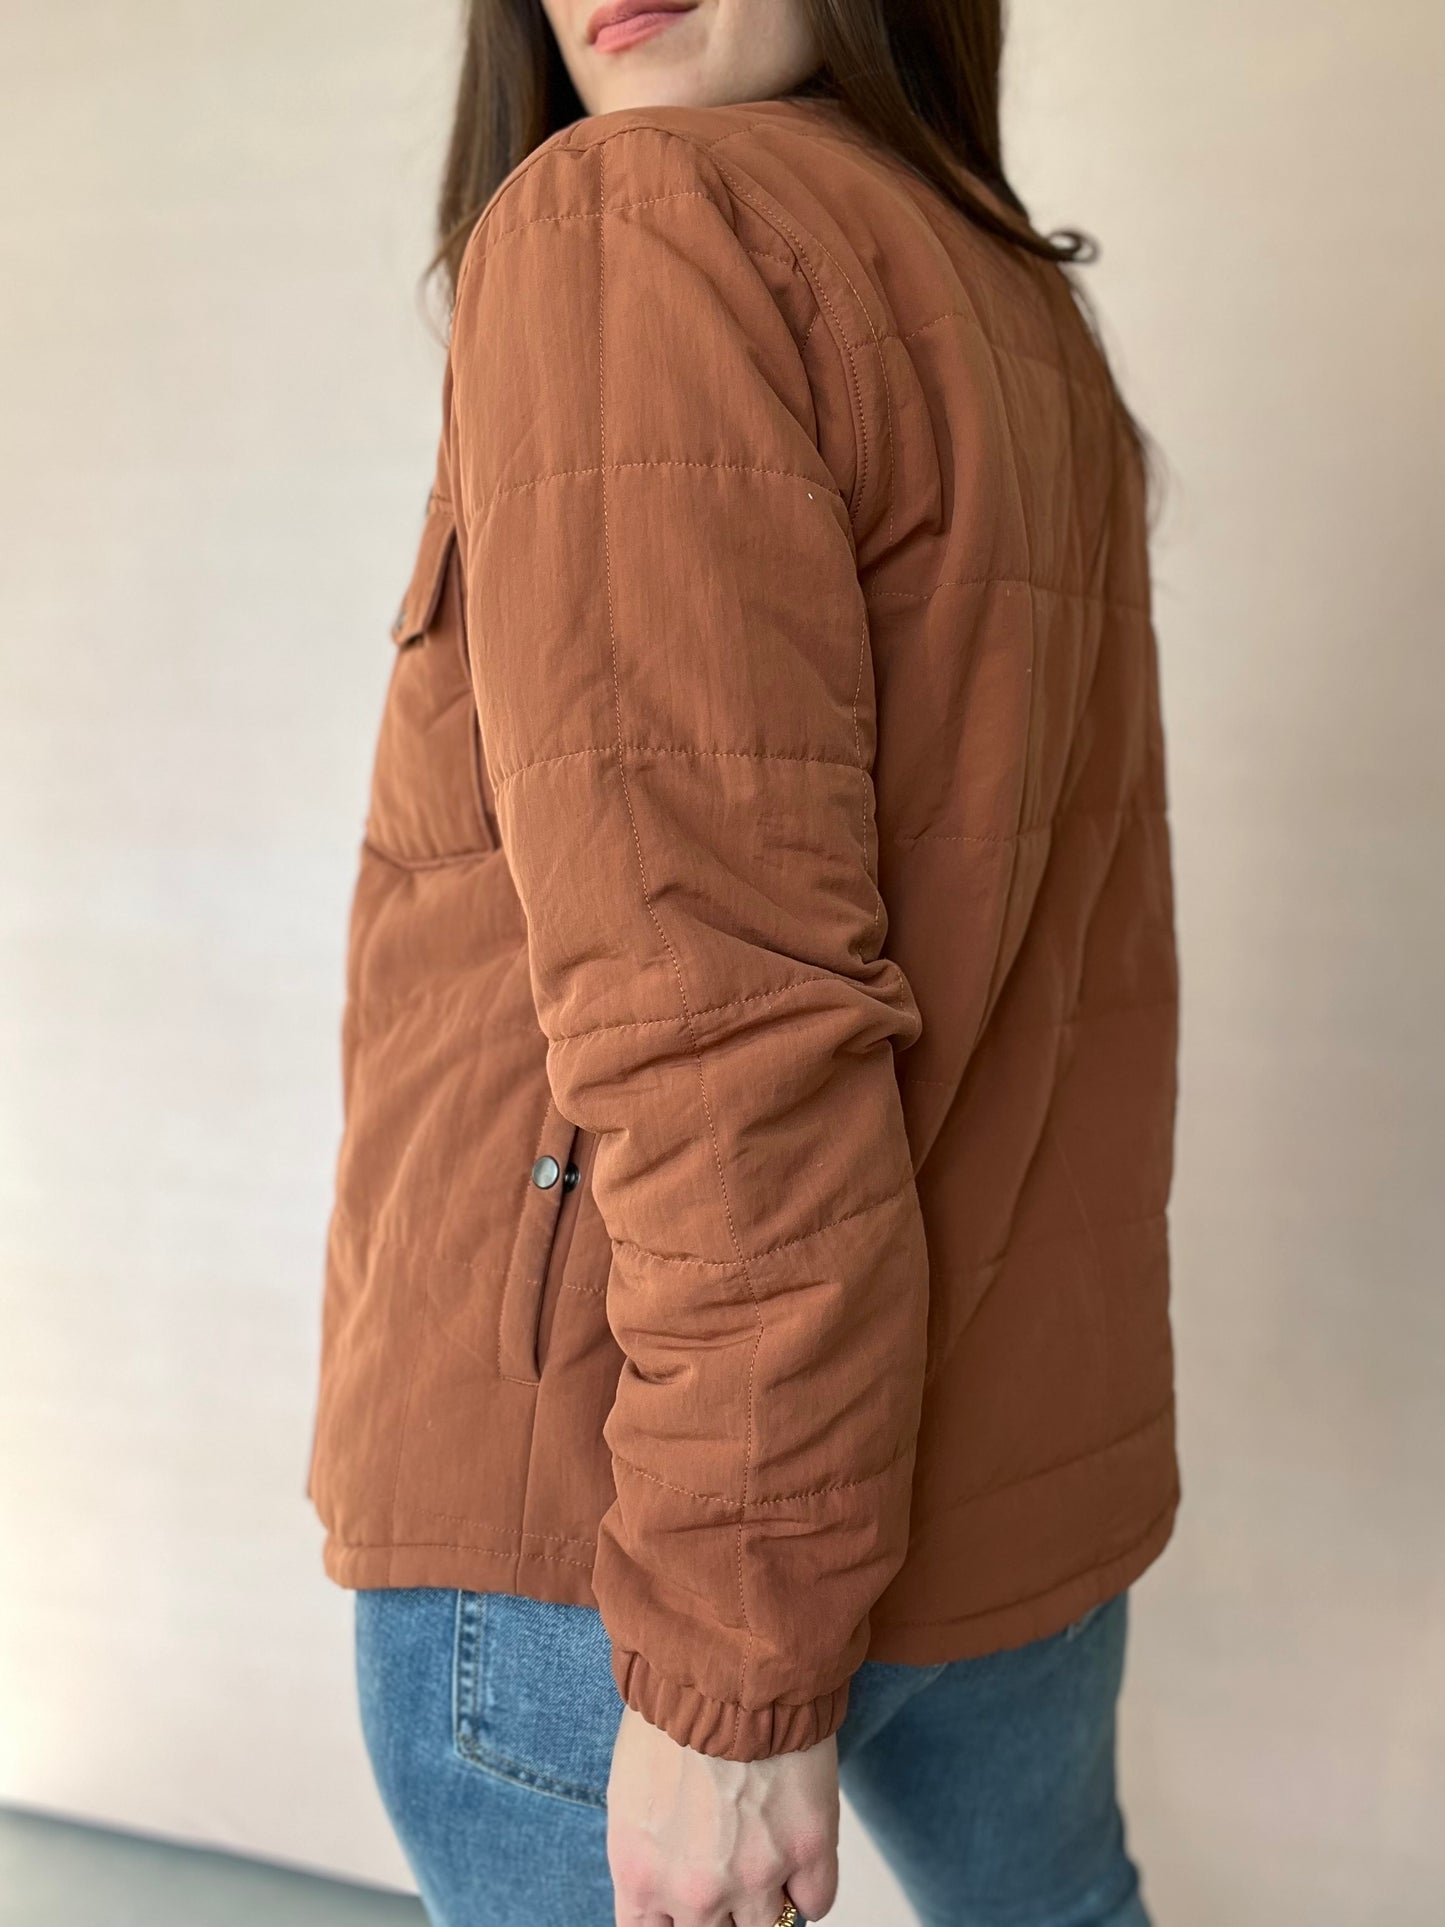 Quilted Patagonia Jacket - Size M